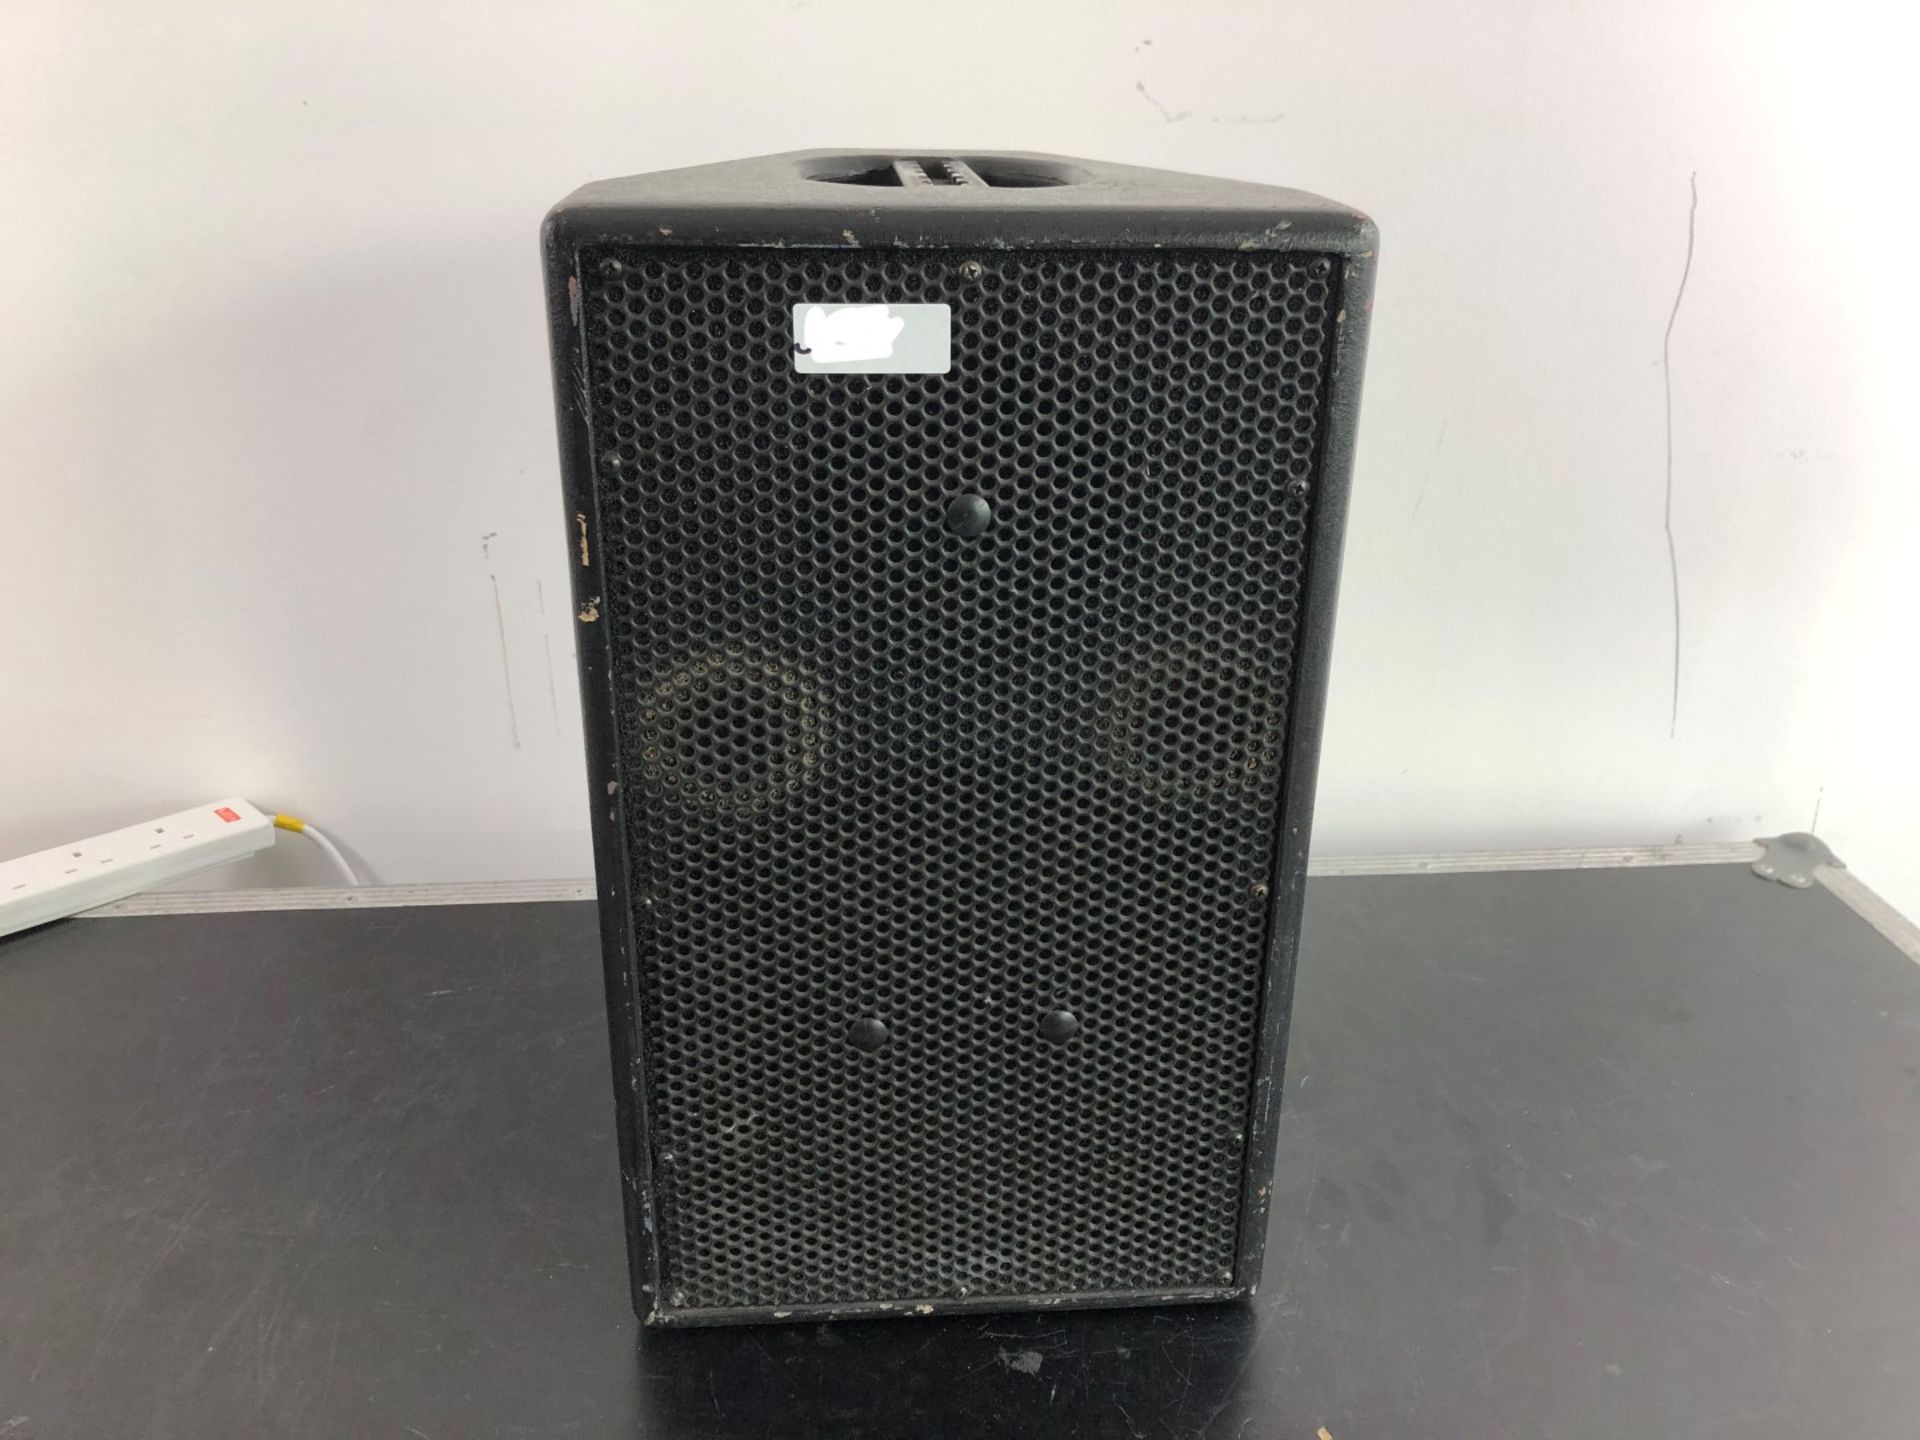 1 x EAW JF100 Speaker - Ref: 654 - CL581 - Location: Altrincham WA14Items will be available to